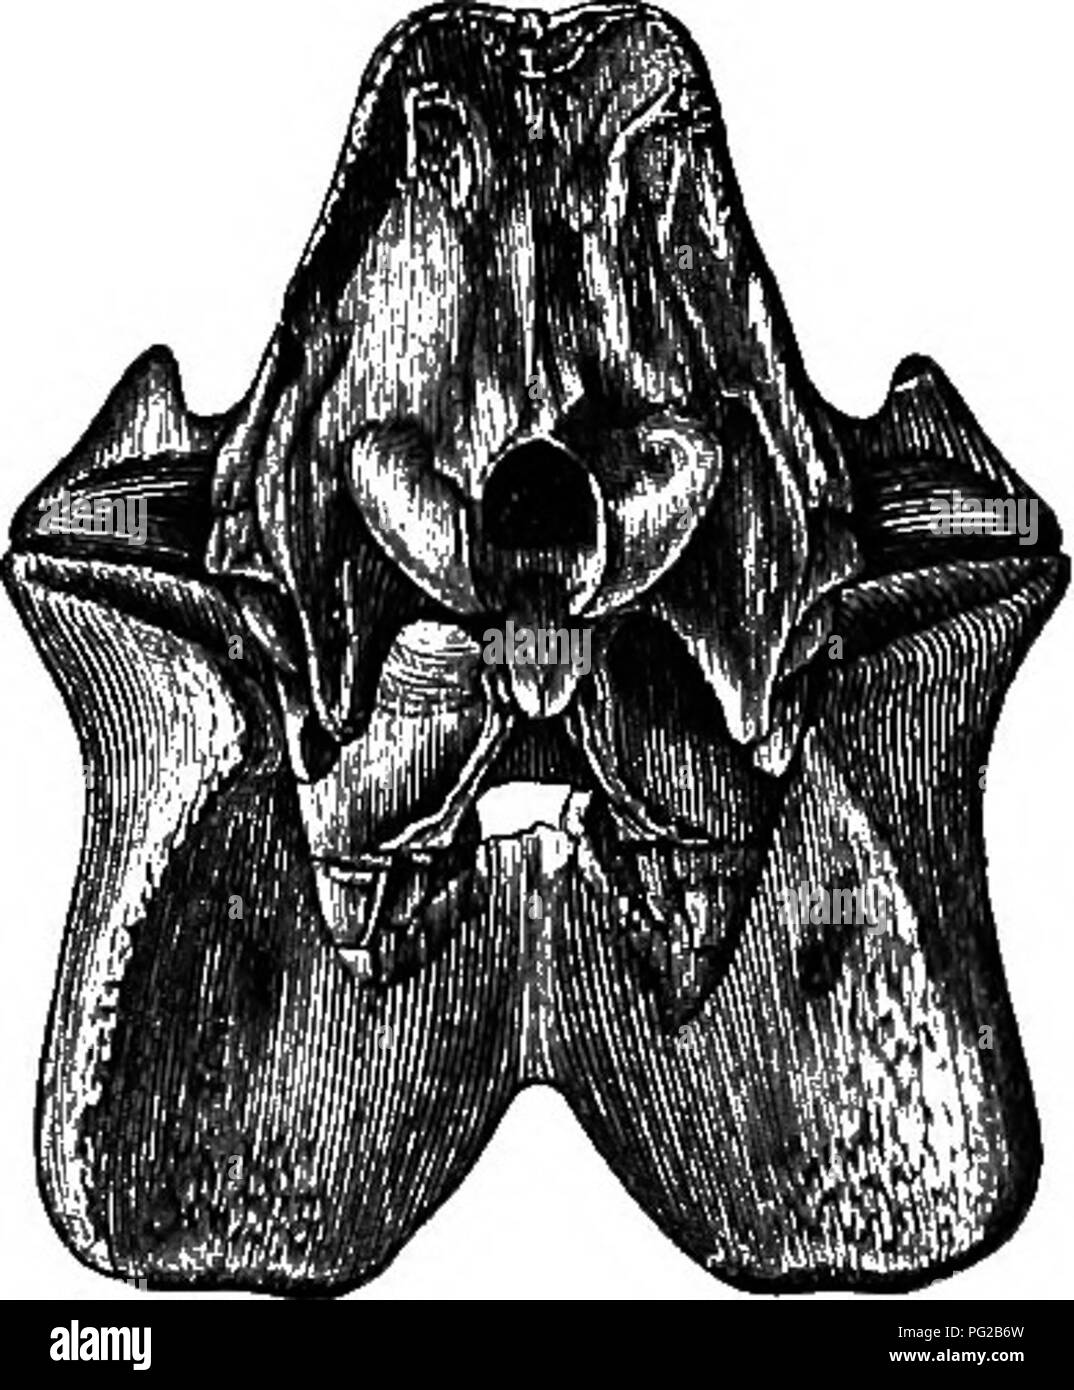 . Cope papers, 1871-[1897. Zoology; Paleontology. 1879-] Extinct American Rhinoceroses and their Allies. 77^h the tapiroid feature of the non-closure of the auditory meatus below by the posttympanic process ; and the postglenoid process is generally more like that of the tapirs than are those of the later genera Aphelops and Rhinocerus. The form of the femur is also quite characteristic, presenting tapiroid characters again in the shape of the great trochanter. This process is not flat and obliquely truncated as in the genera above named, but is horizon- tal proximally, and with a produced rec Stock Photo